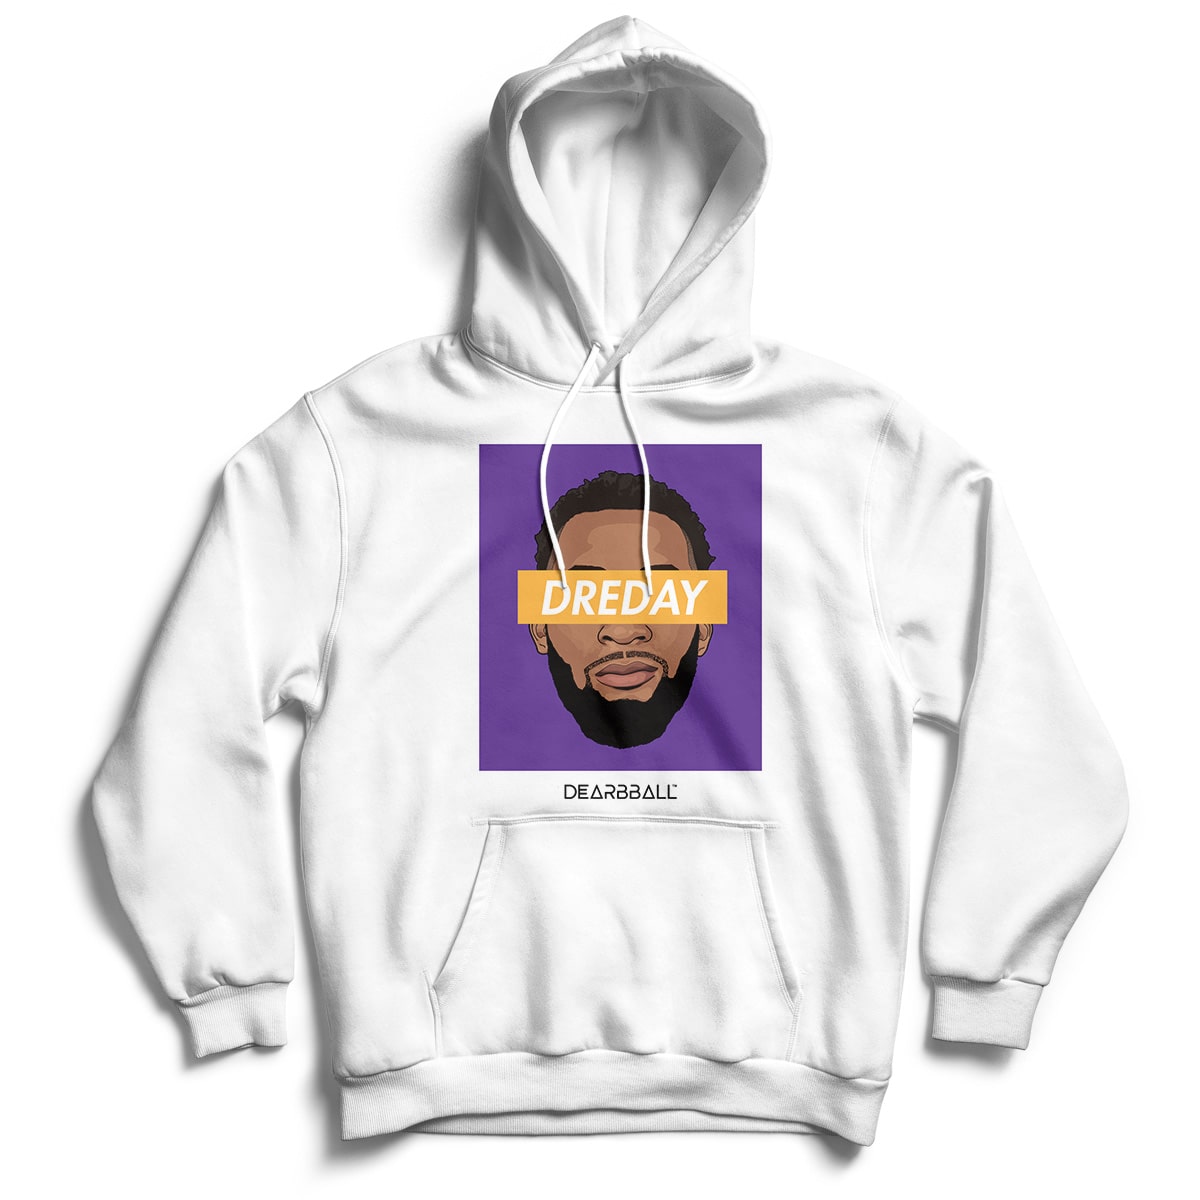 Andre Drummond Sweat à Capuche Bio - DRE DAY Purple Los Angeles Lakers Basketball Dearbball blanc